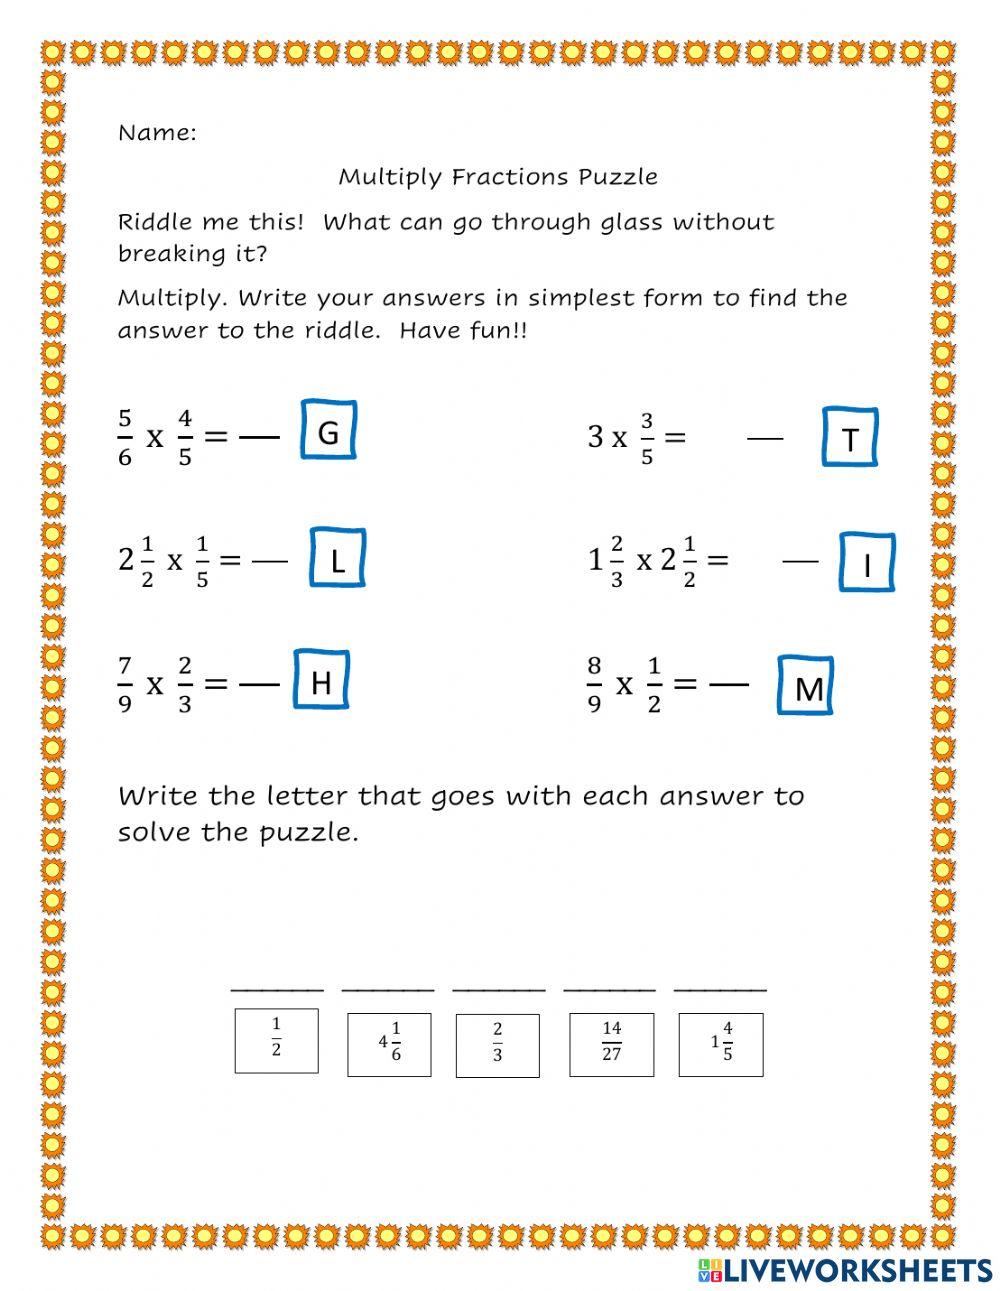 Multiply Fractions Puzzle